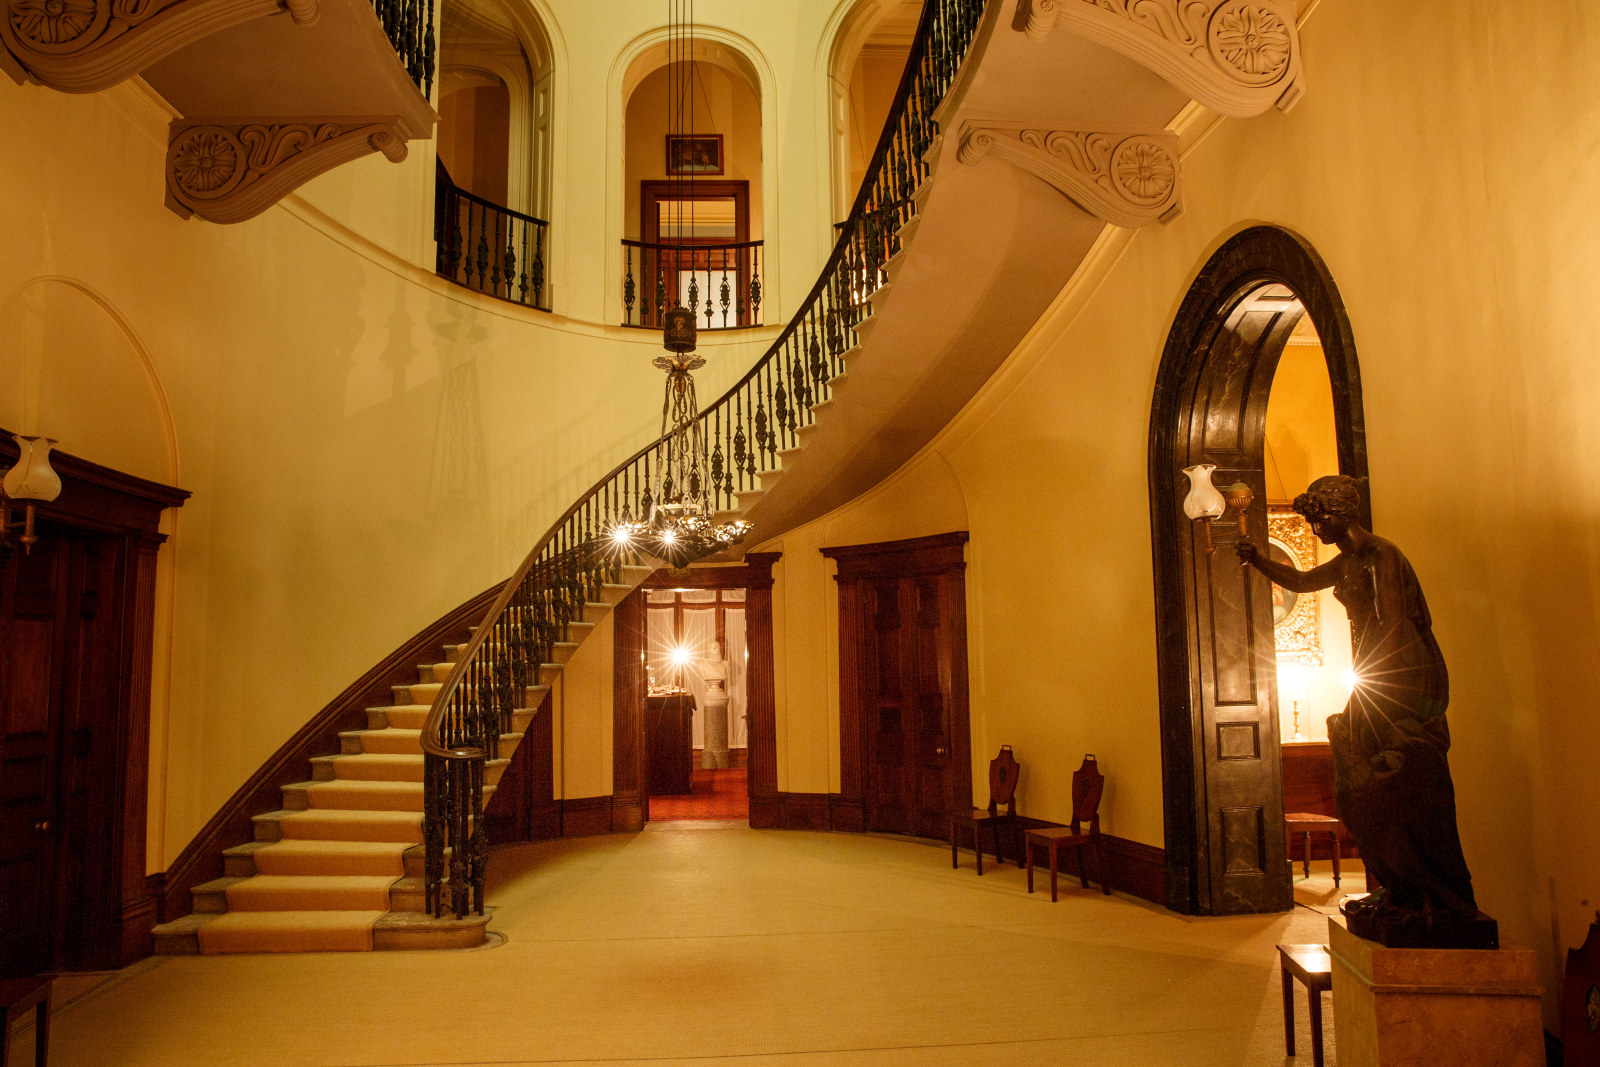 View of the staircase in The Saloon, lit by candle light at Elizabeth Bay House